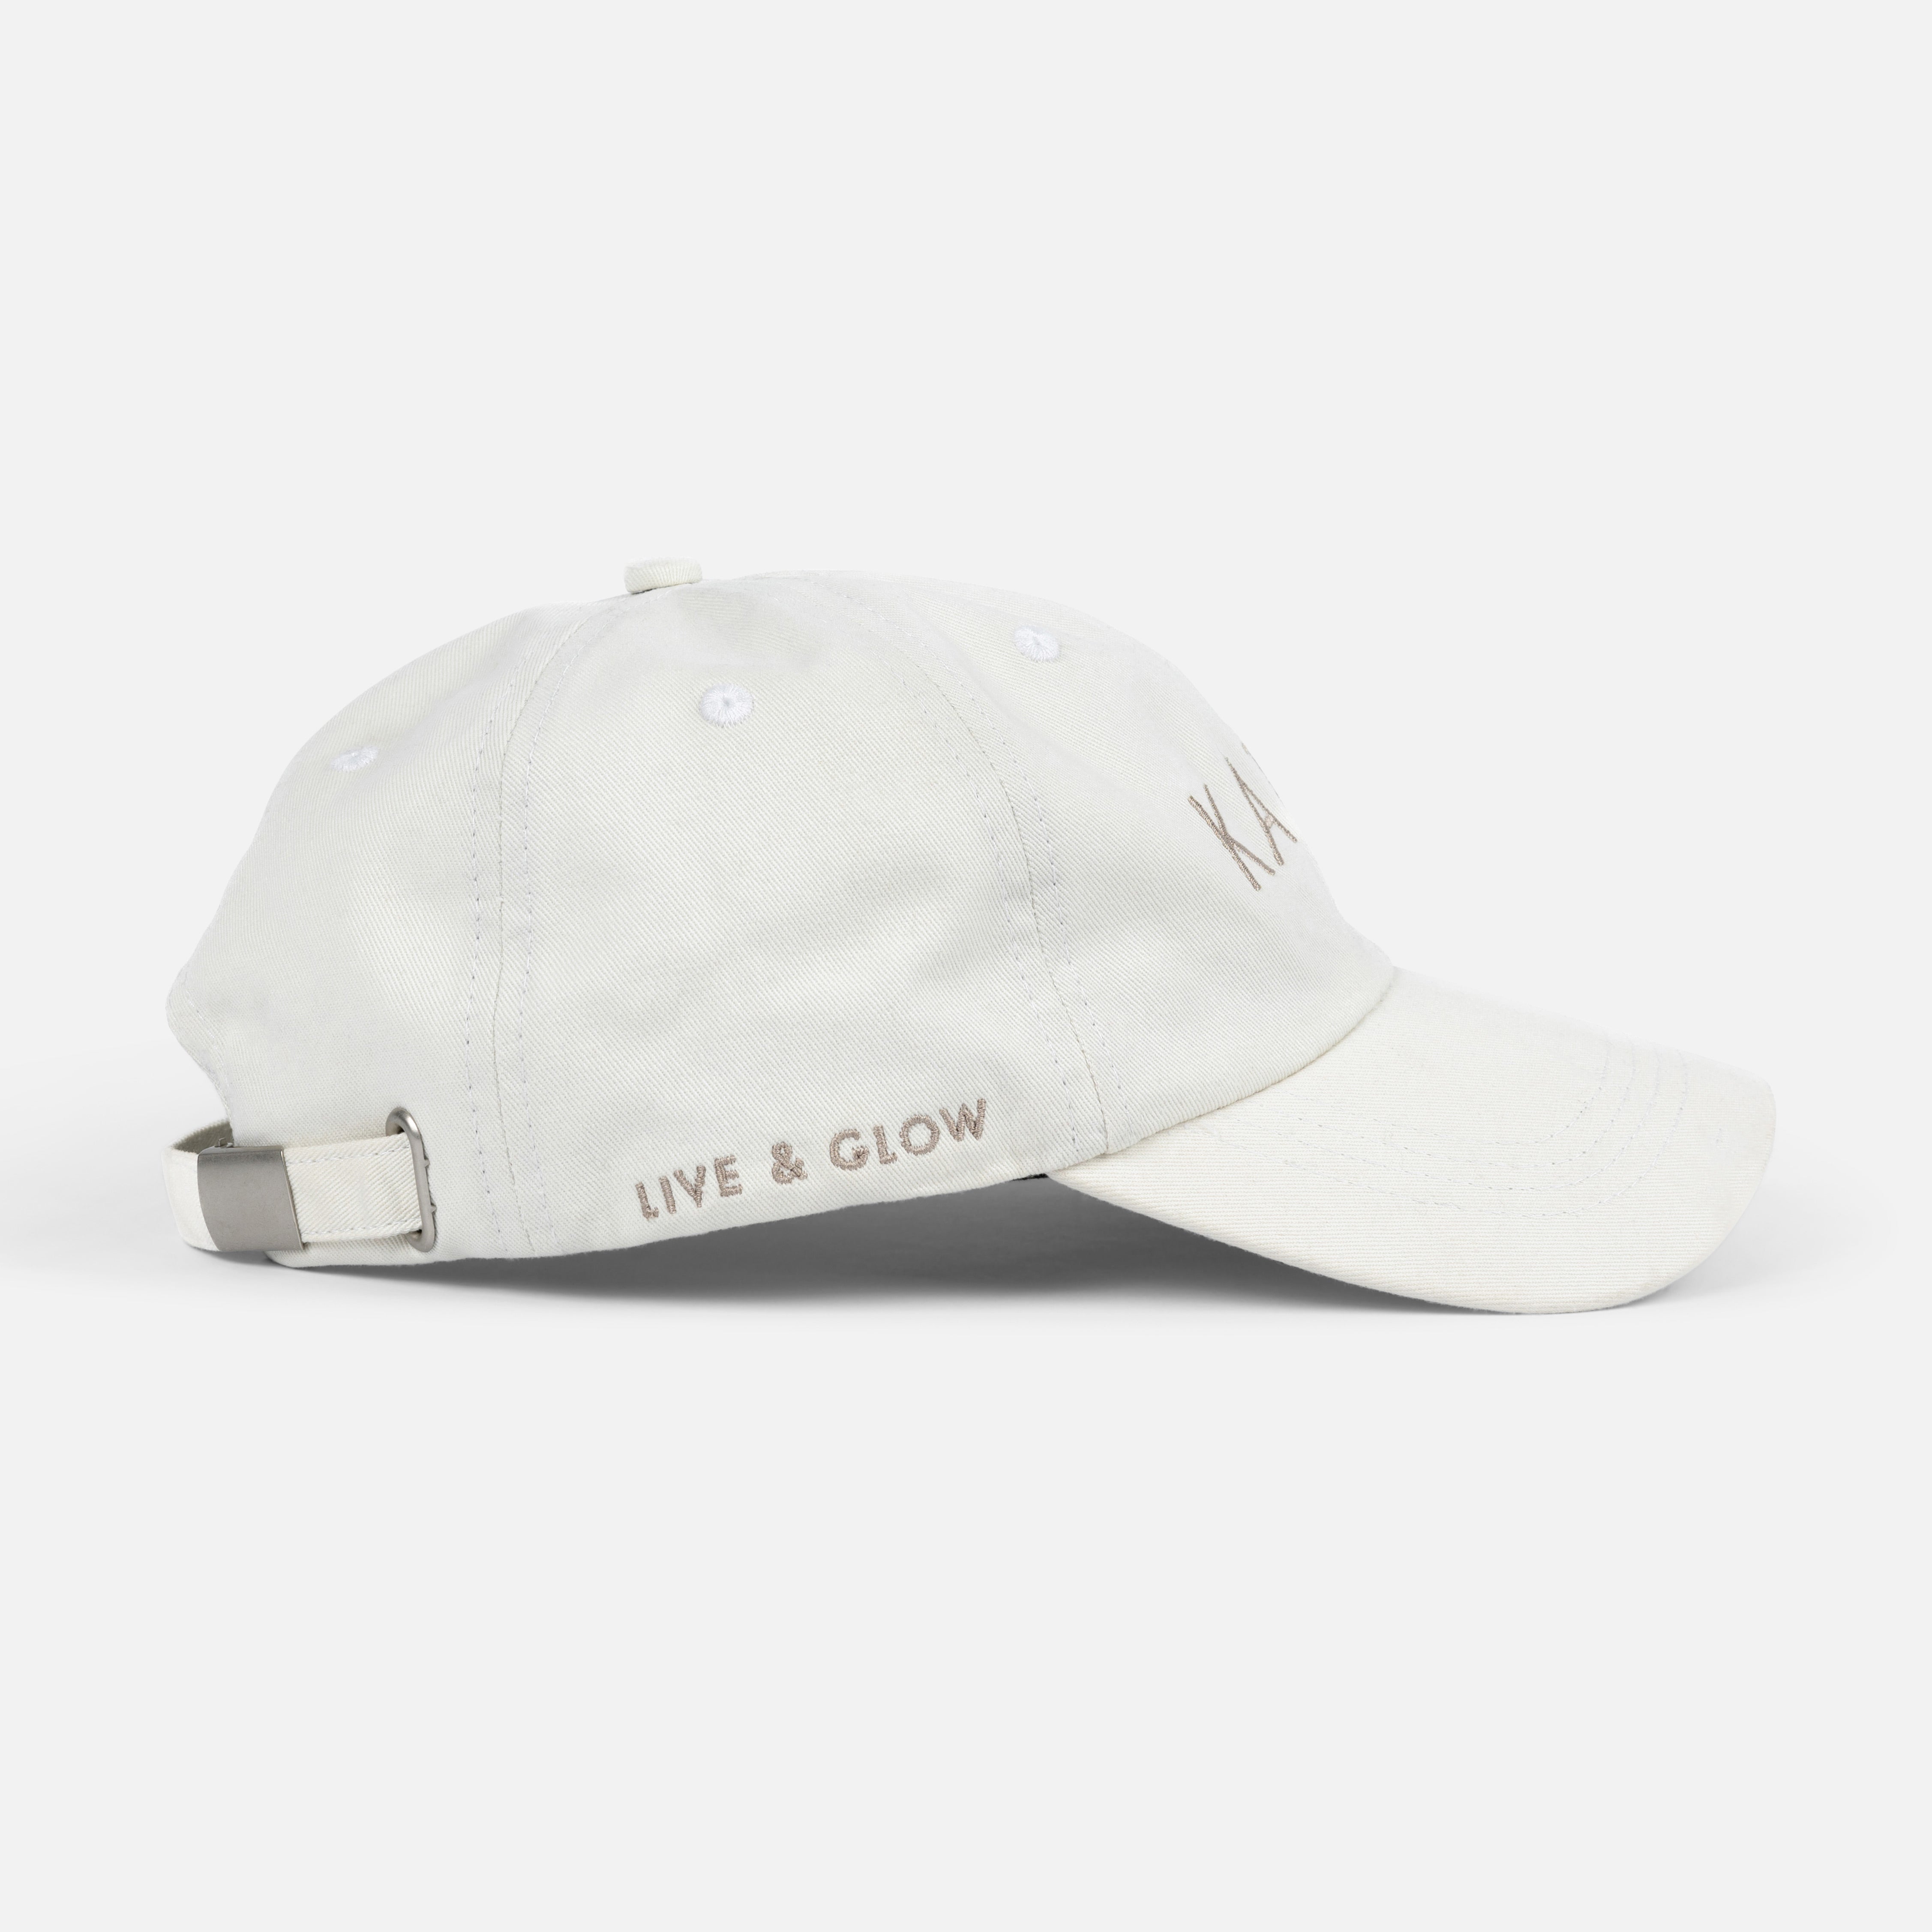 Street Smart Cap - Limited 1st Edition